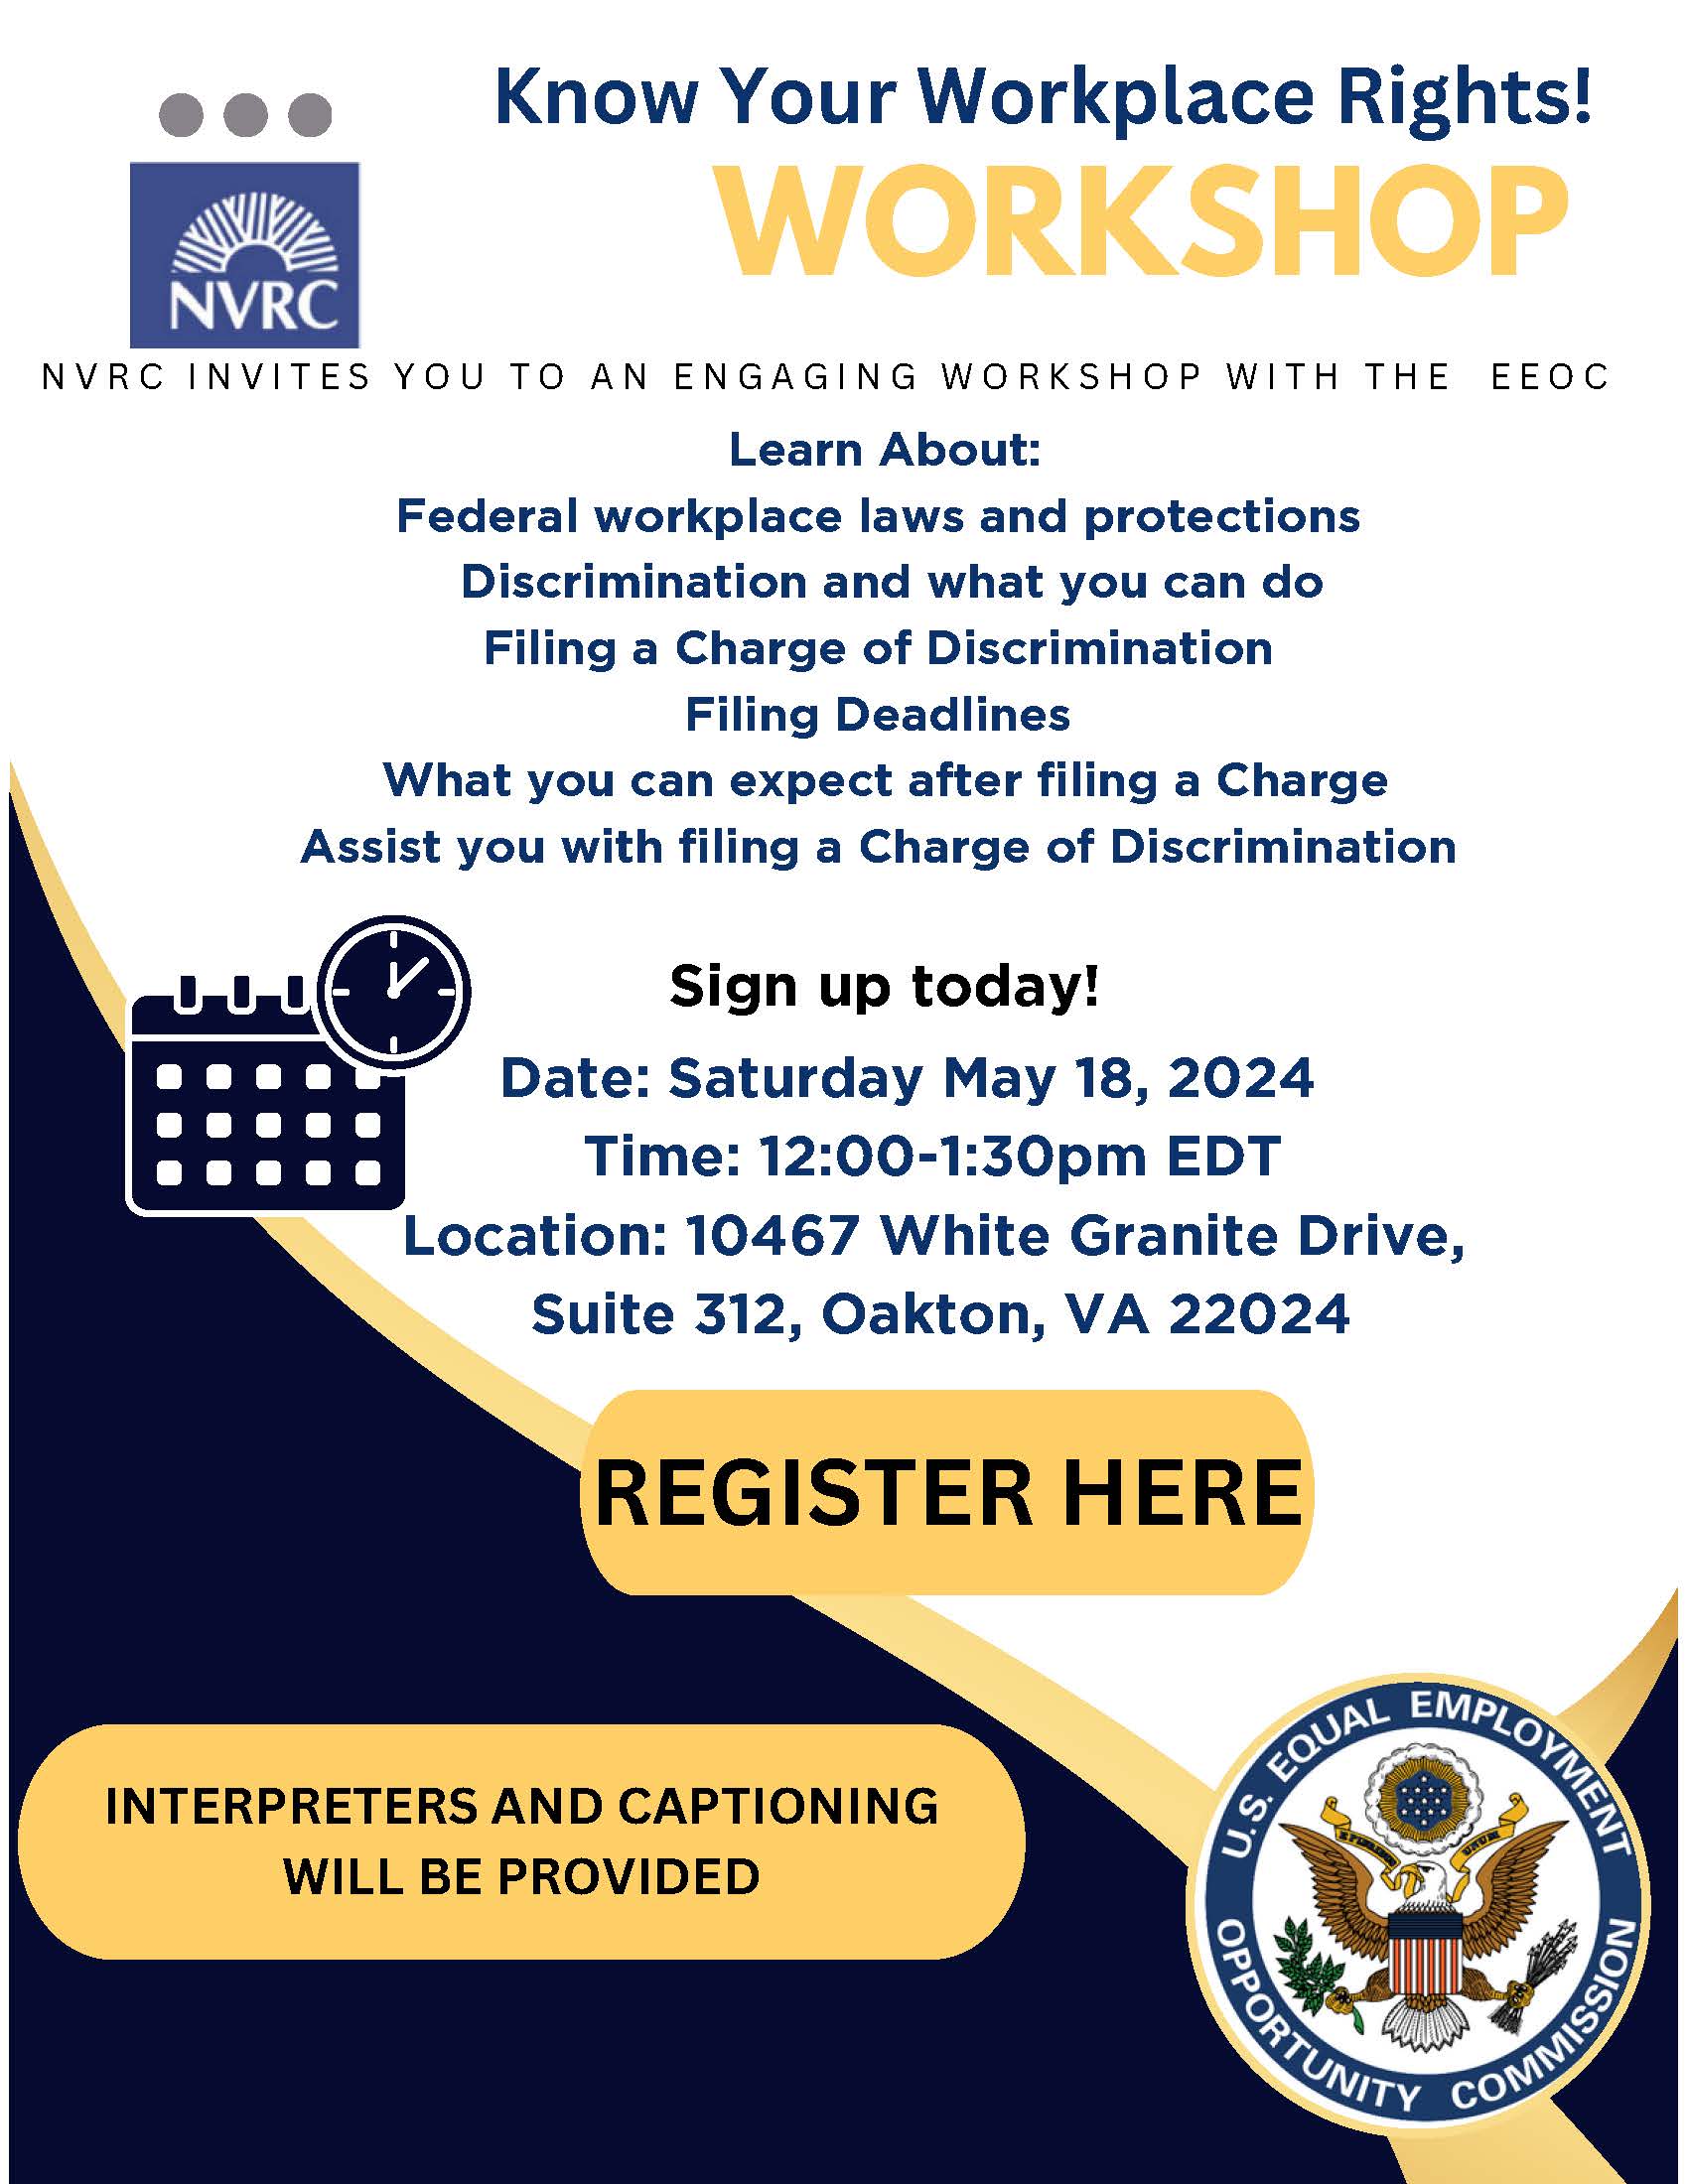 flyer for the Know Your Workplace Rights! Workshop hosted by NVRC and EEOC on May 18, 12 PM to 1:30 PM